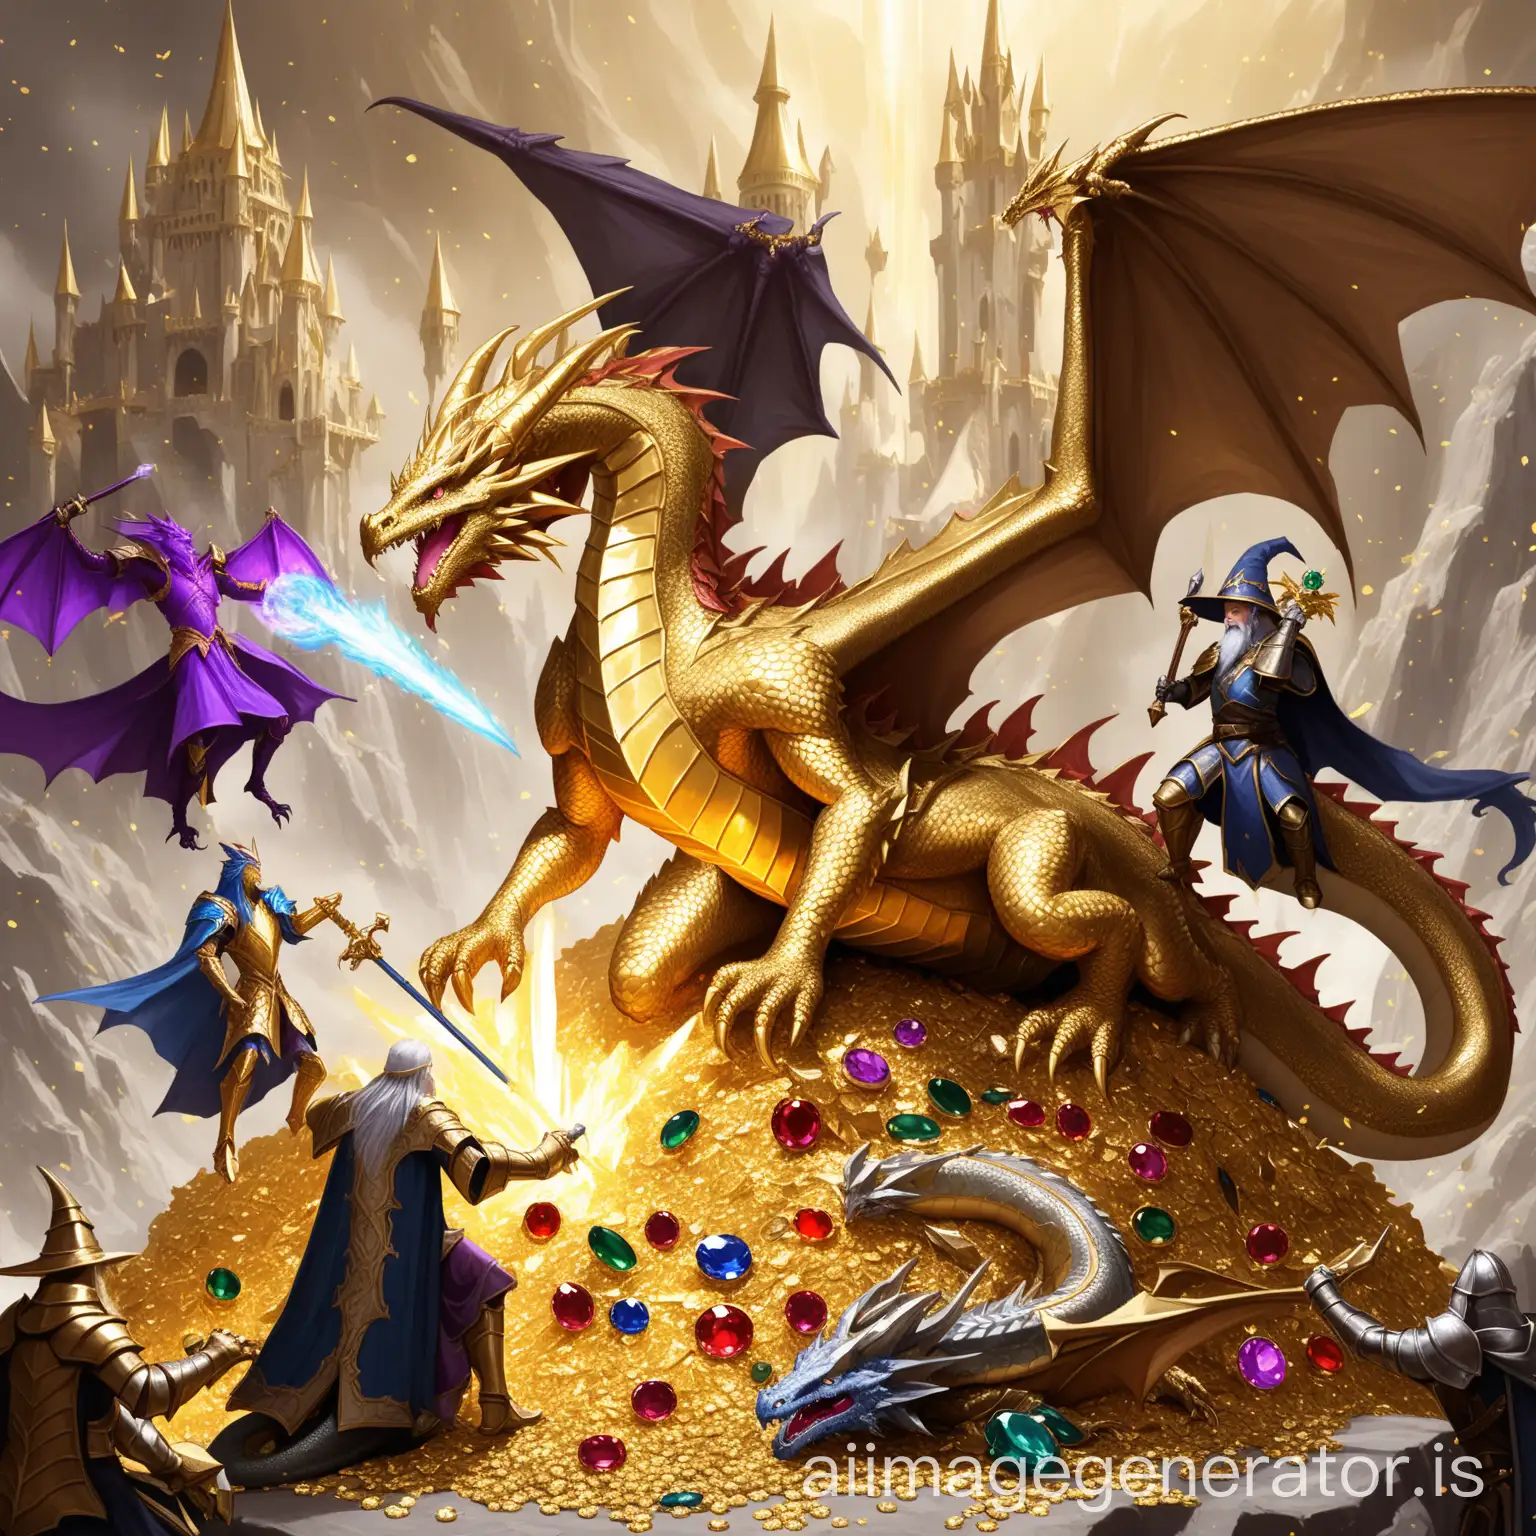 A fantasy dragon sitting on a pile of gold and jewells fighting a wizard and a paladine